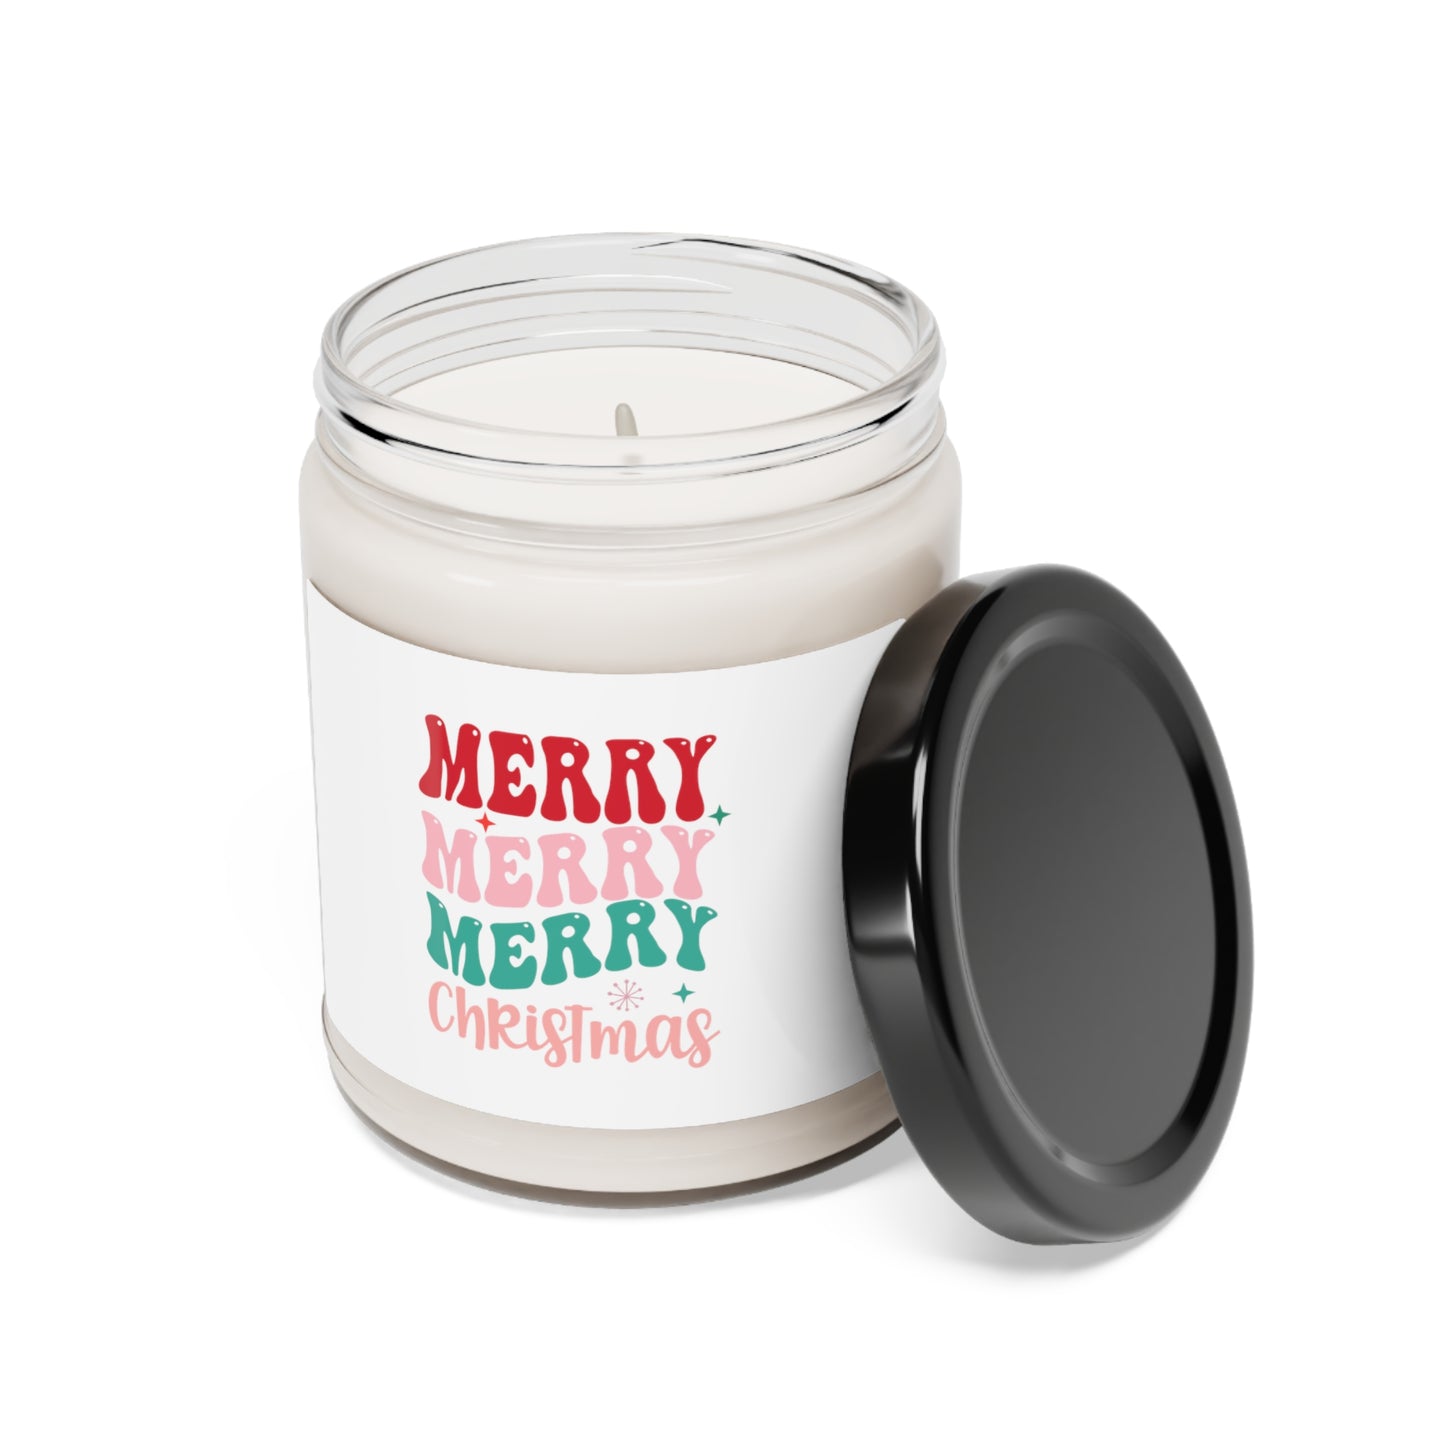 Merry Christmas Scented Soy Candle, 9oz